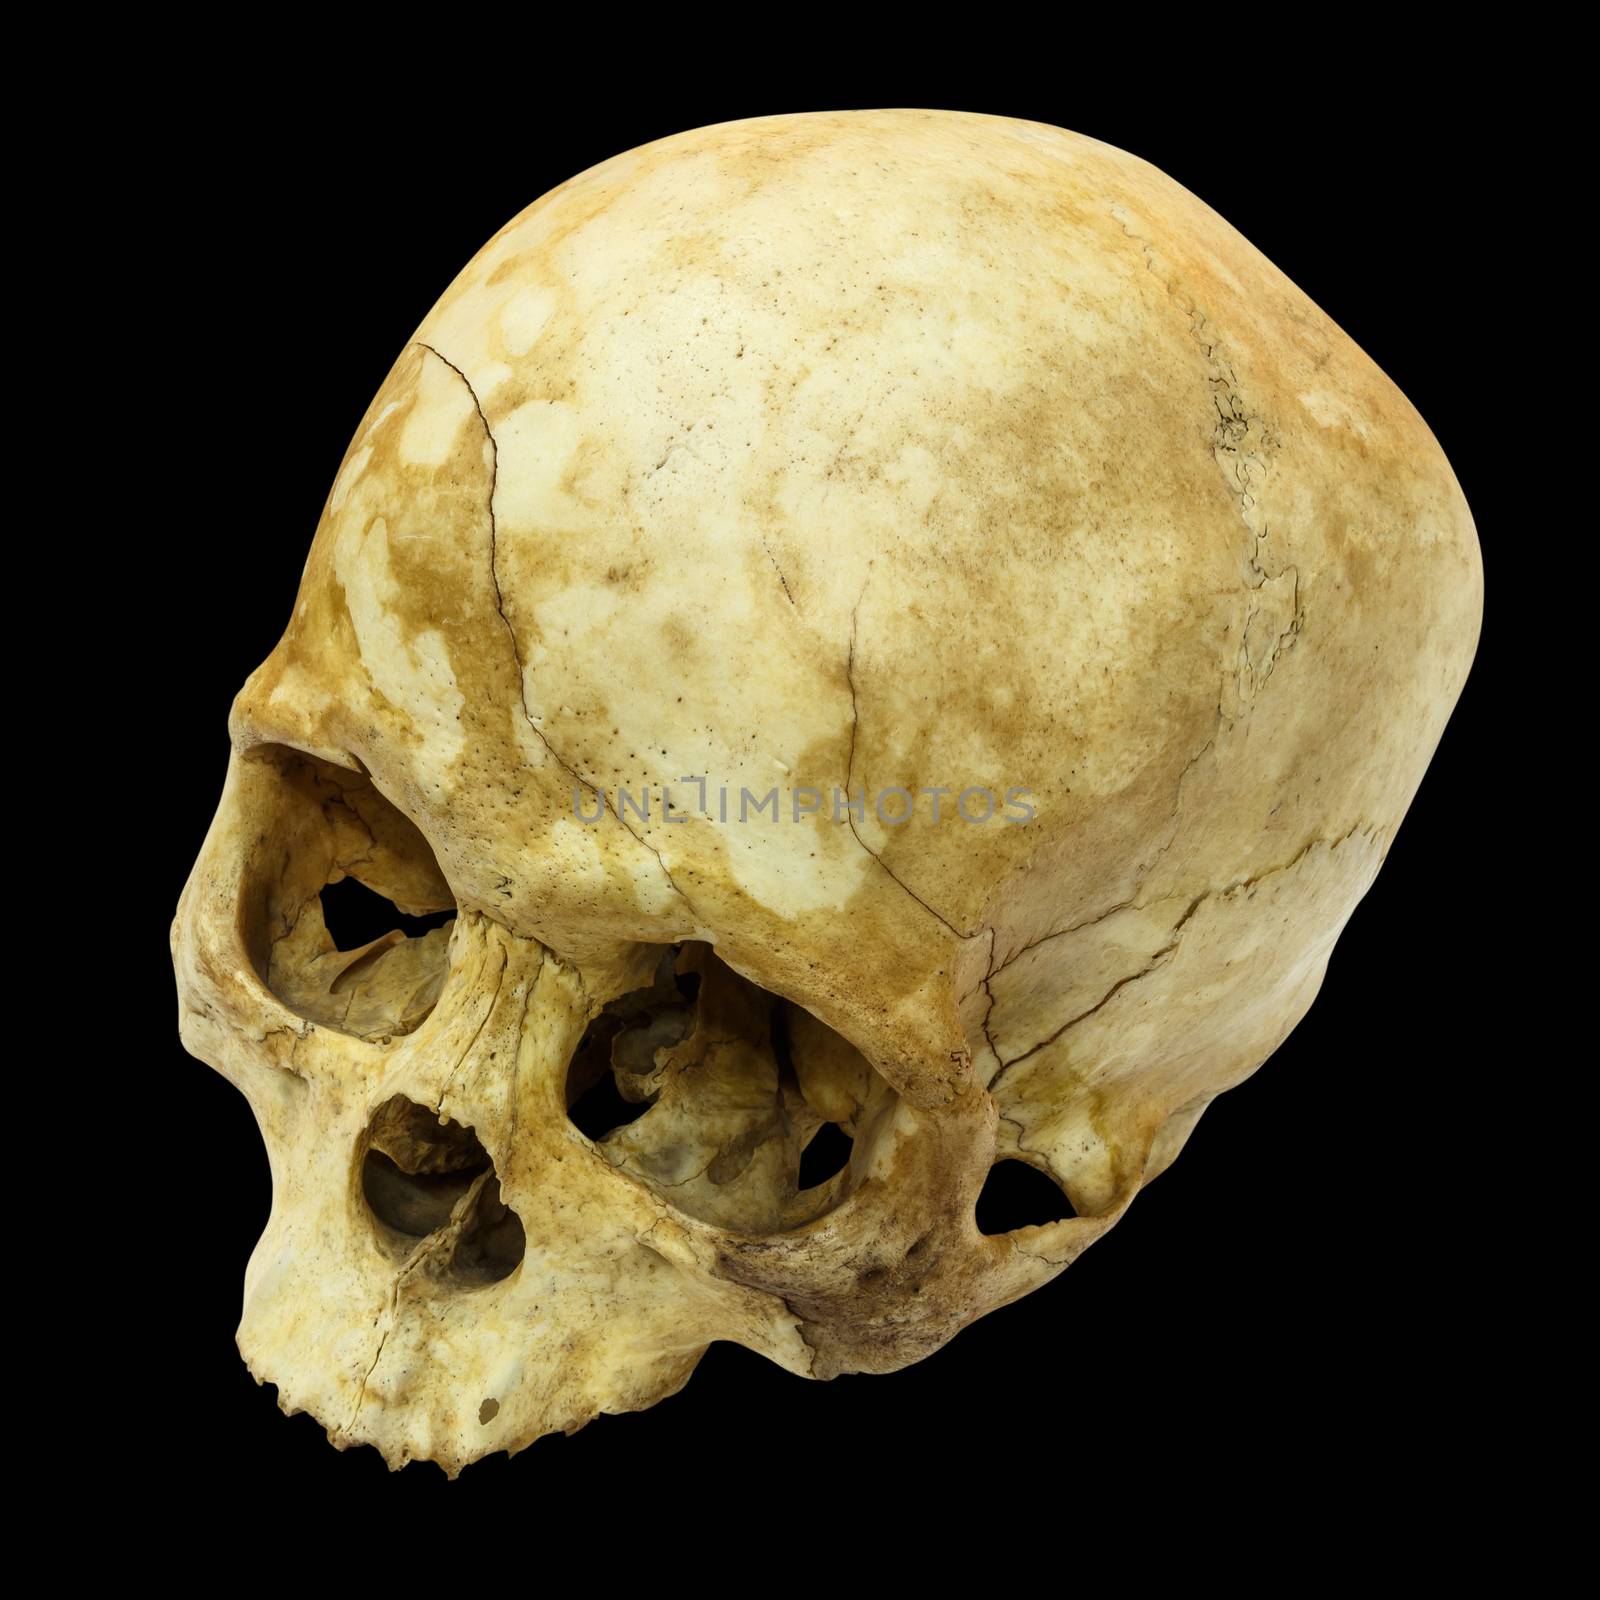 Human Skull Fracture(top side,apex)(Mongoloid,Asian) on isolated background